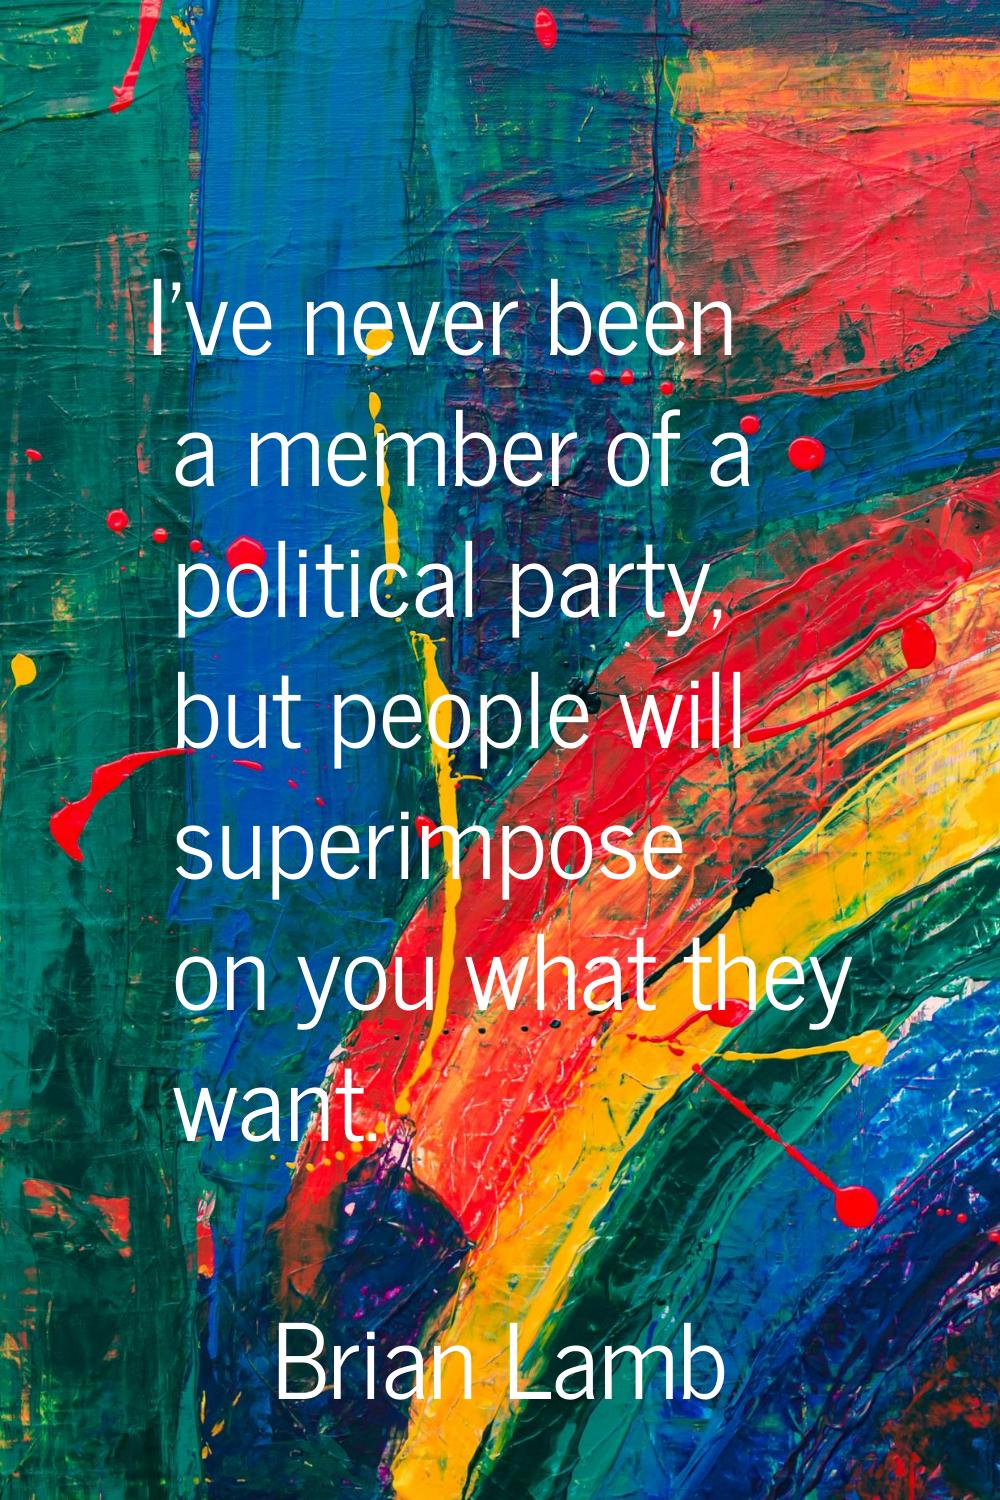 I've never been a member of a political party, but people will superimpose on you what they want.